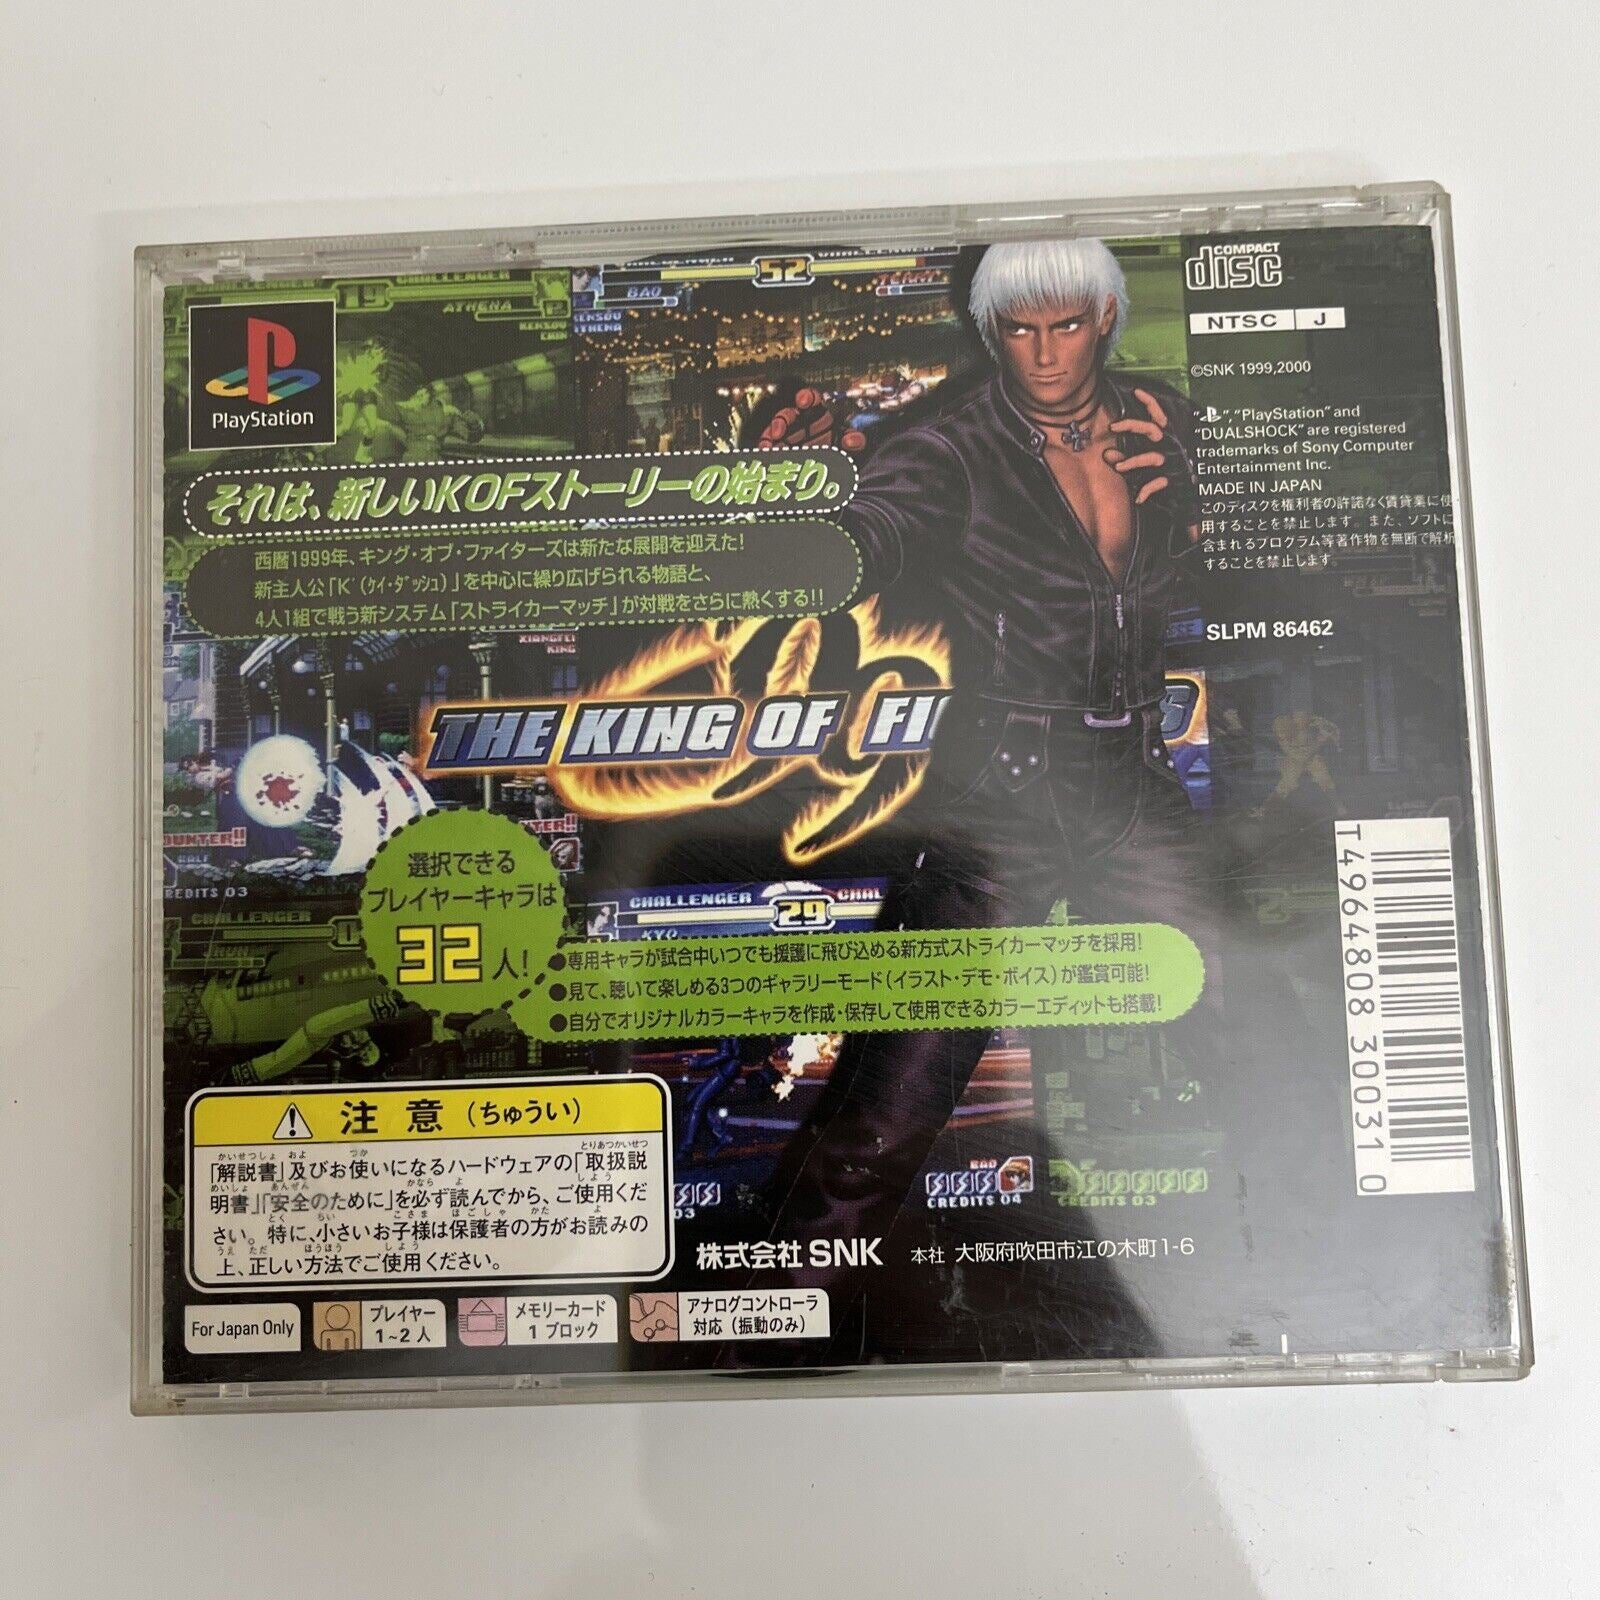 THE KING OF FIGHTERS '97 [PLAYSTATION THE BEST] (NTSC-J) - BACK